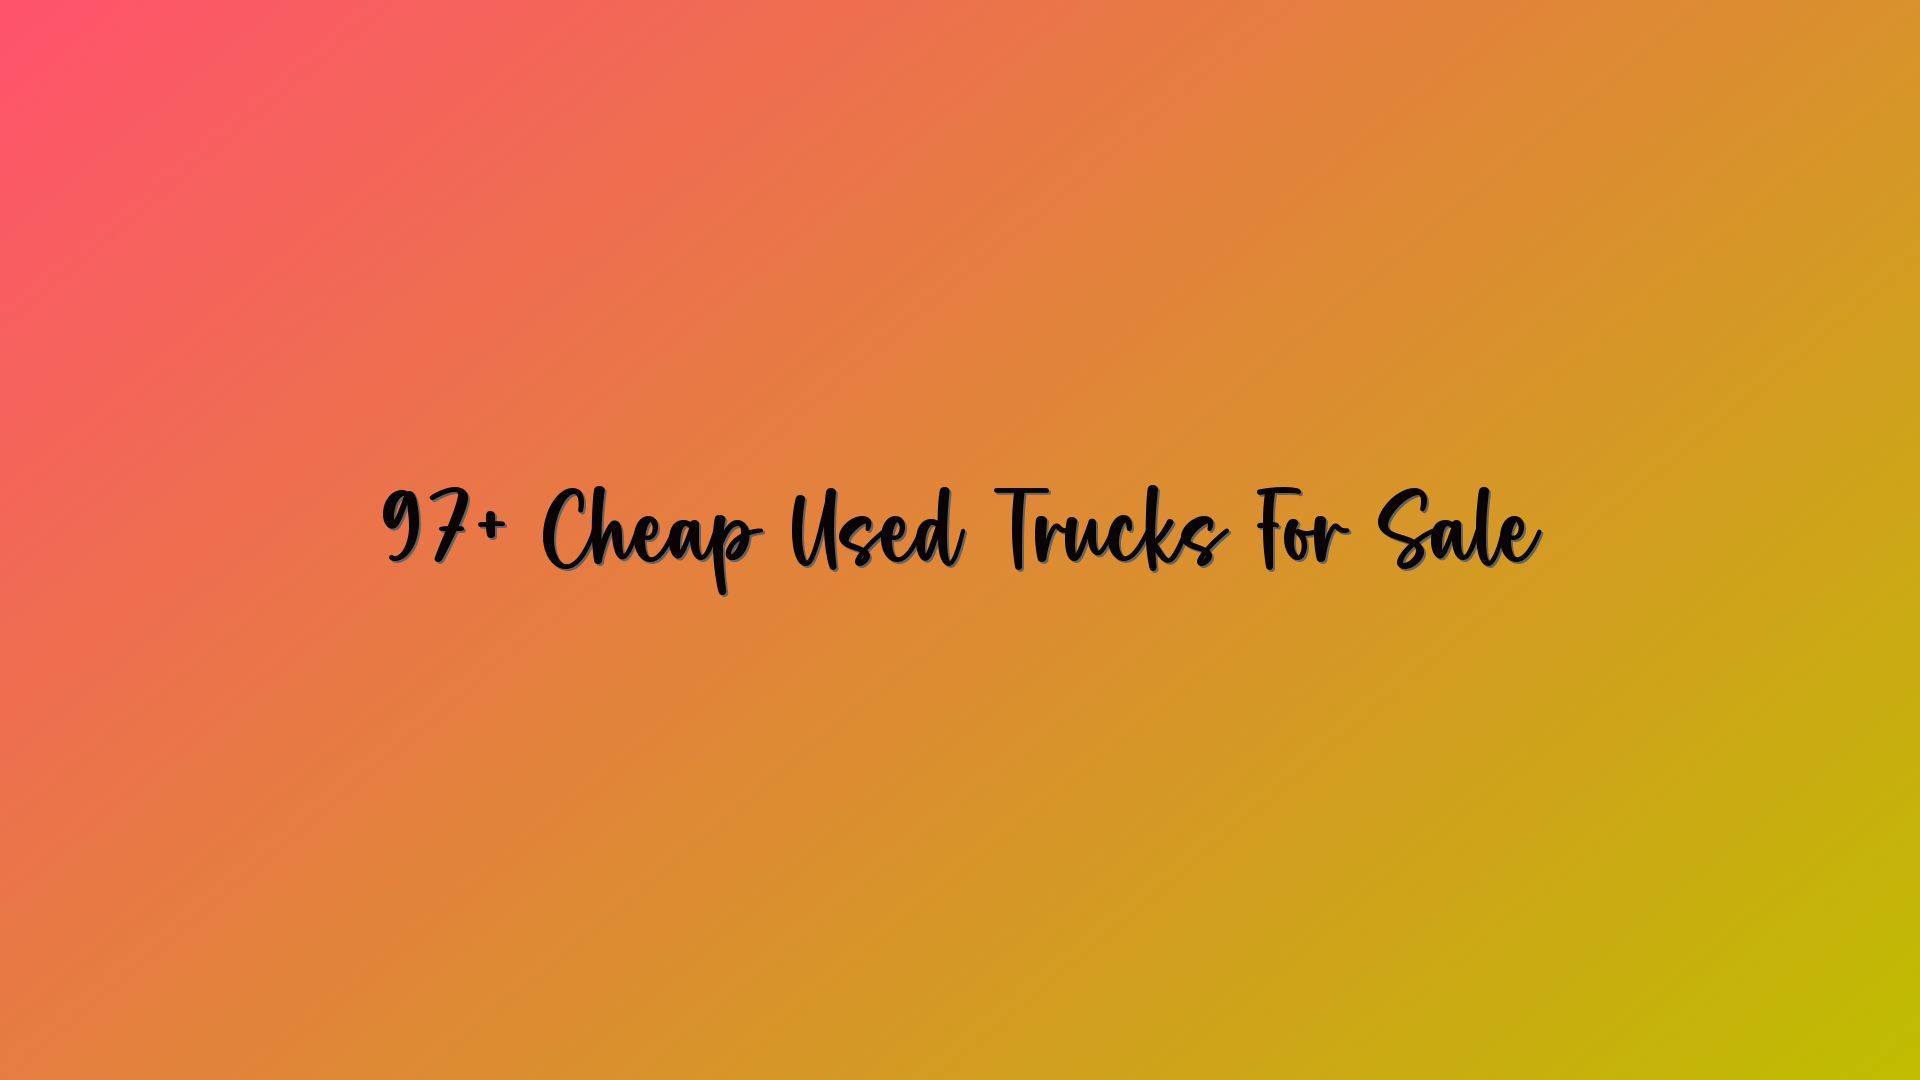 97+ Cheap Used Trucks For Sale